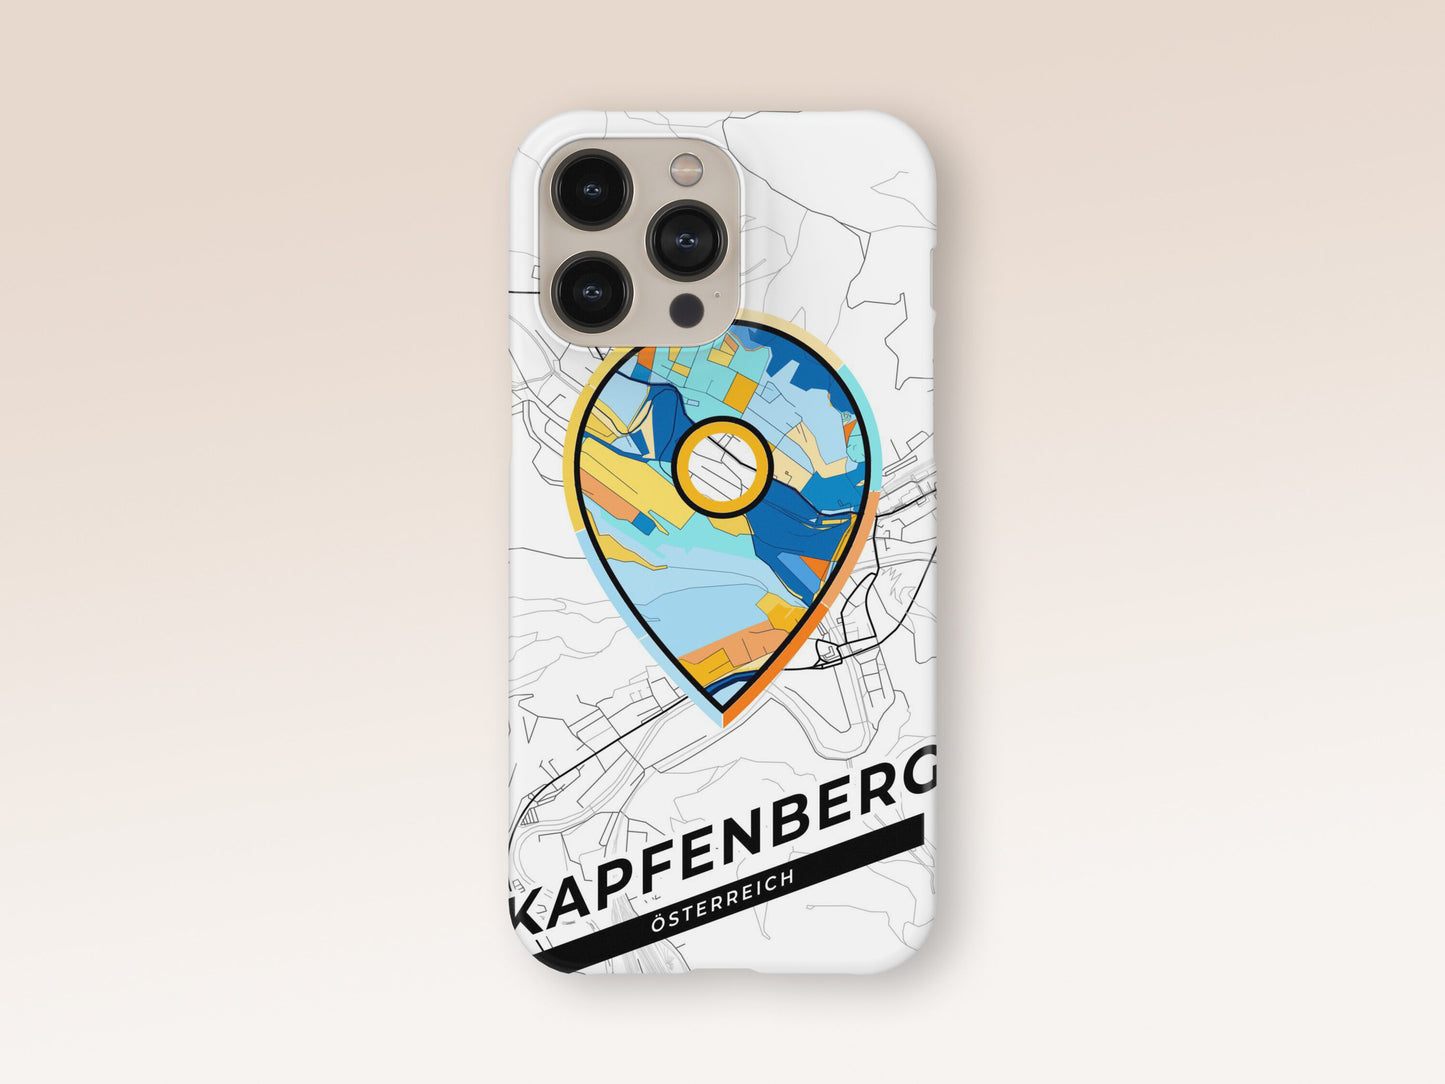 Kapfenberg Österreich slim phone case with colorful icon. Birthday, wedding or housewarming gift. Couple match cases. 1